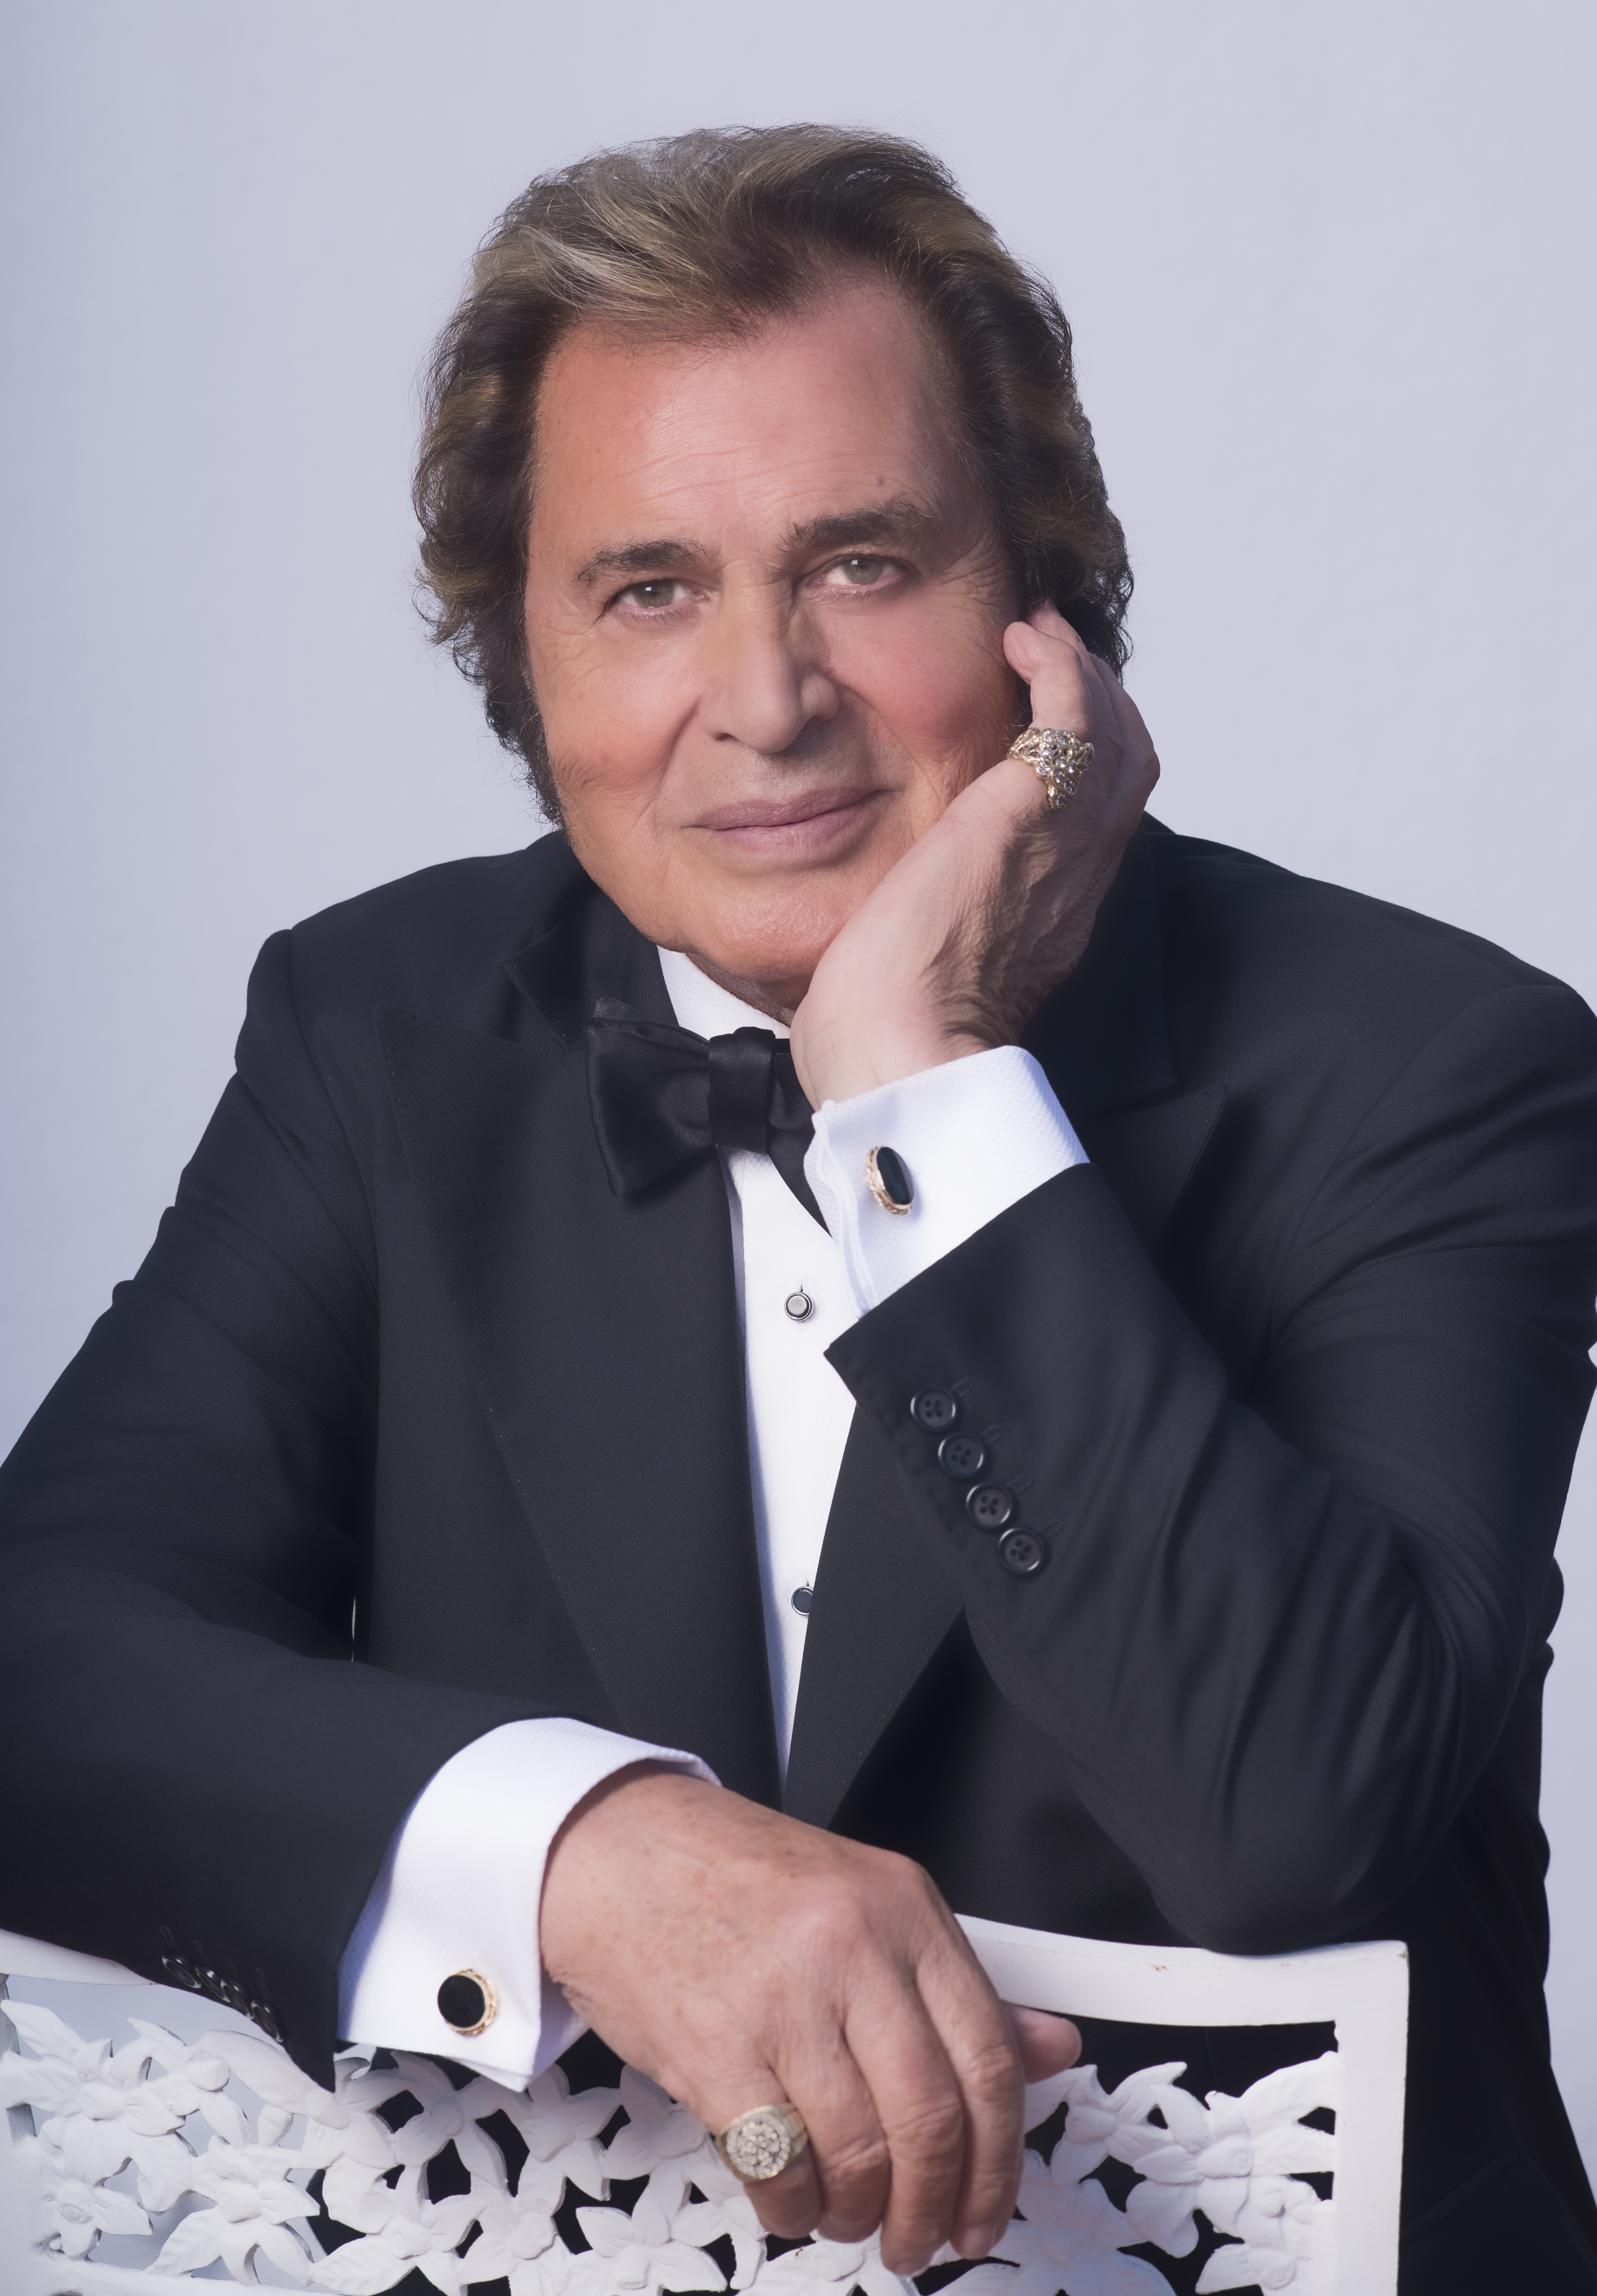 BBC Radio Premiere of Engelbert Humperdinck’s “How Can You Live With Yourself”